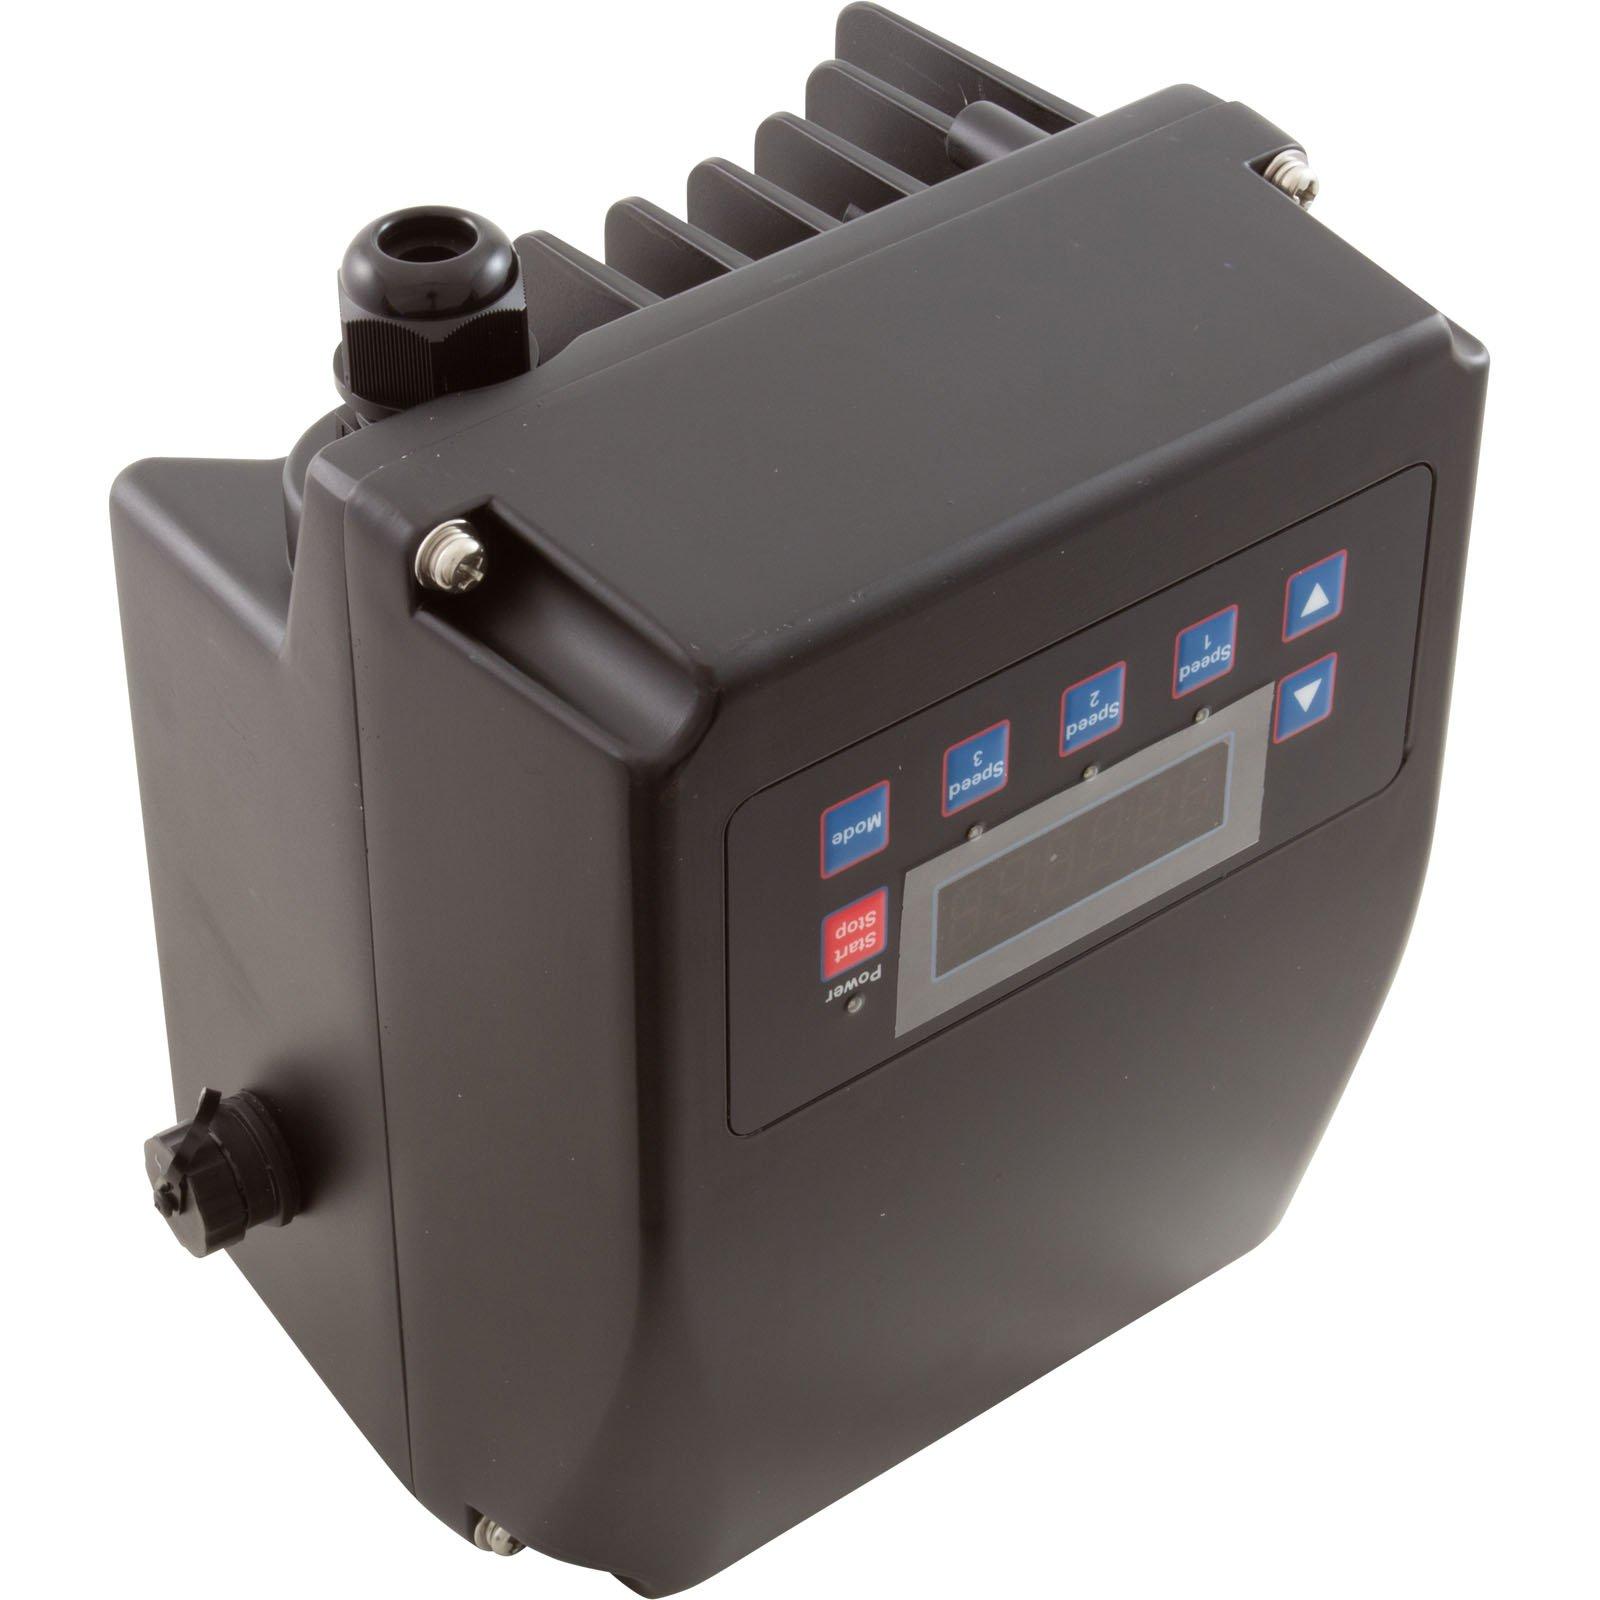 Raypak - Protege Programmable Controller Kit for RPVSP1 Variable Speed Pool Pump